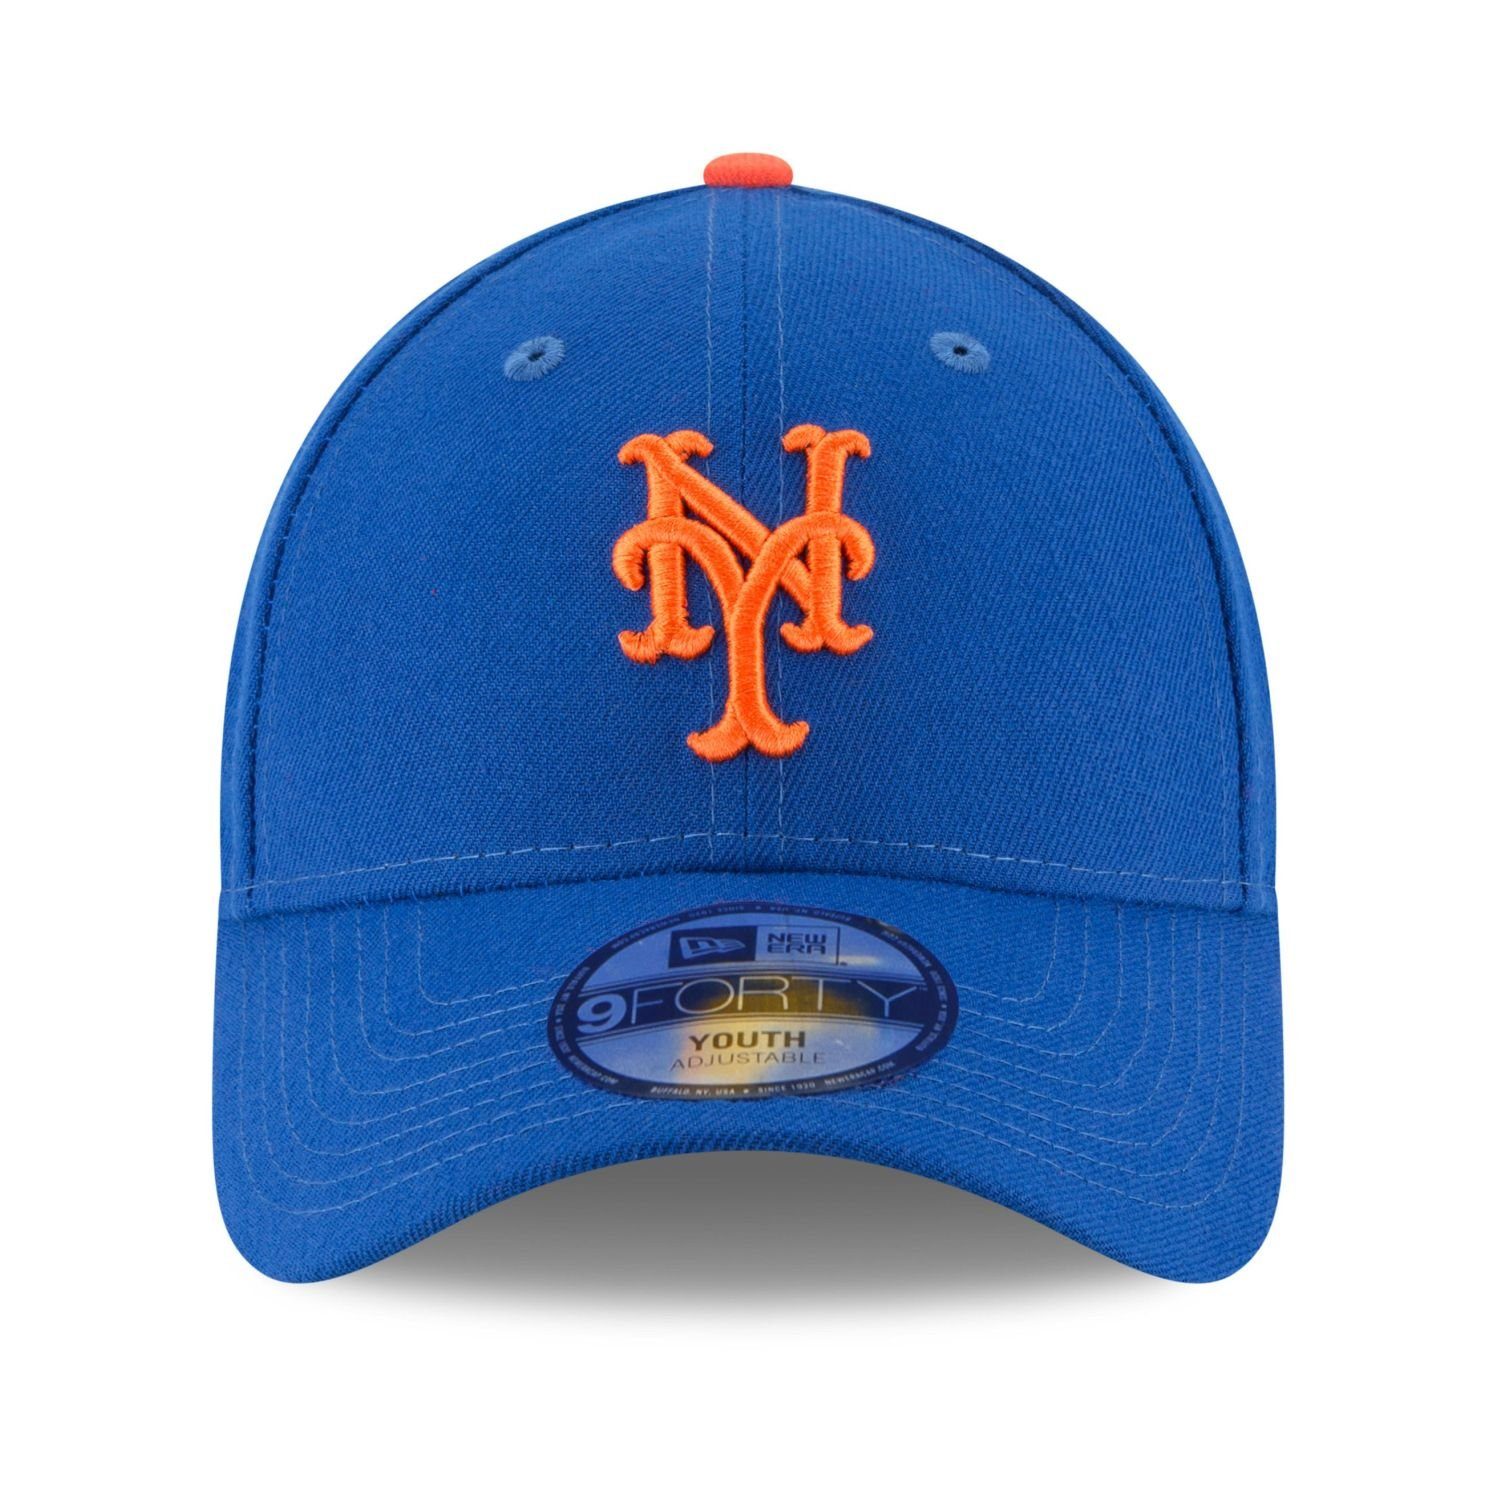 New New Baseball Cap Youth Era Mets LEAGUE York 9Forty